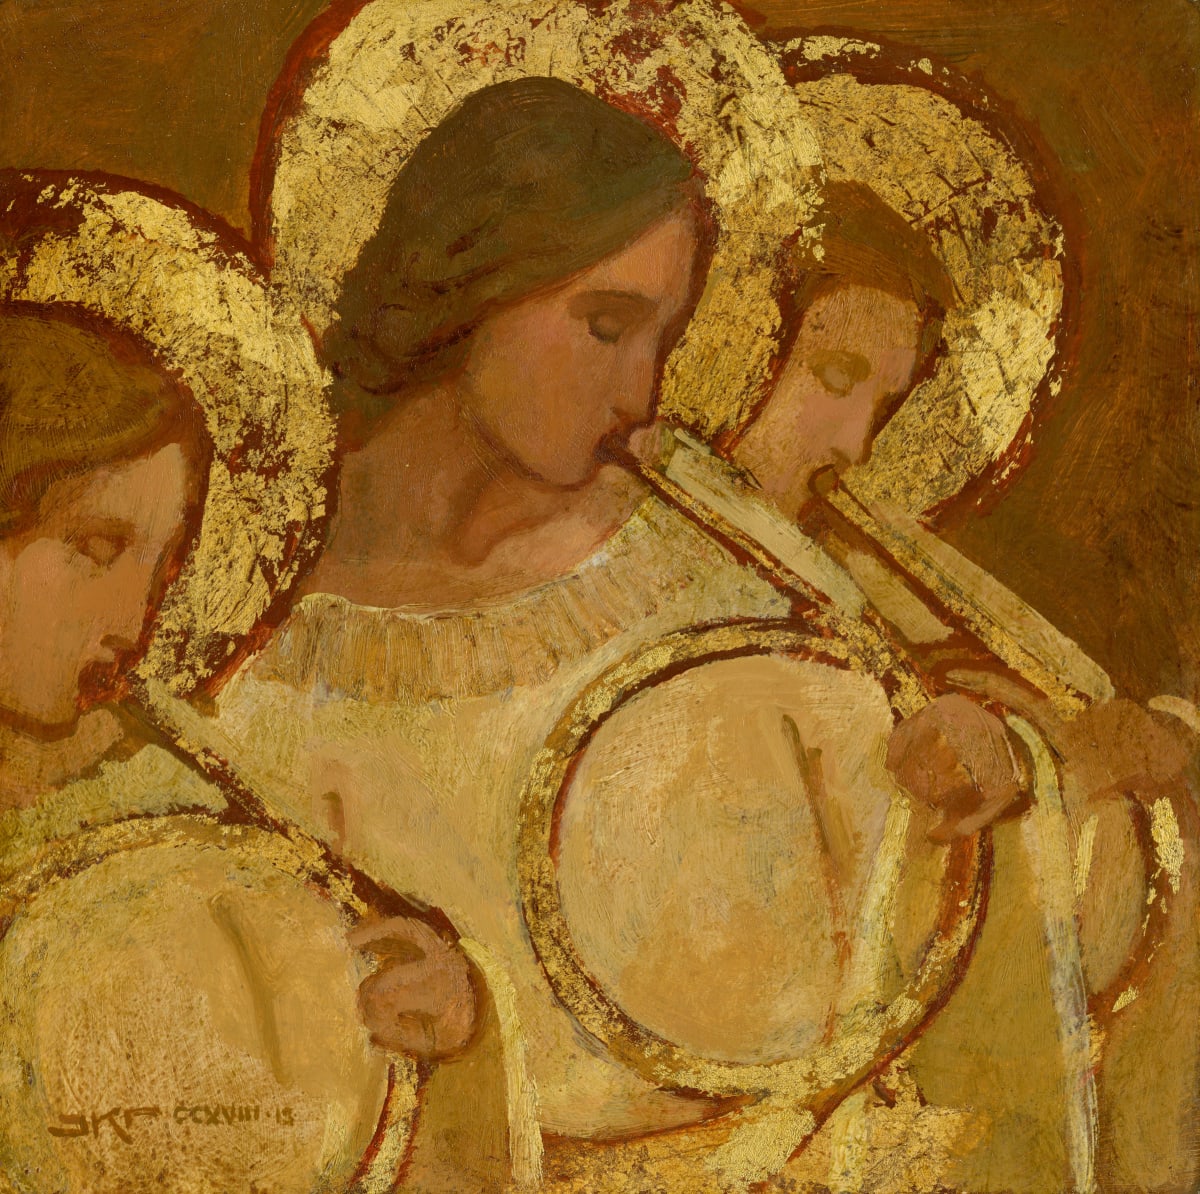 Three French Horns by J. Kirk Richards  Image: Daily Paintings 2021